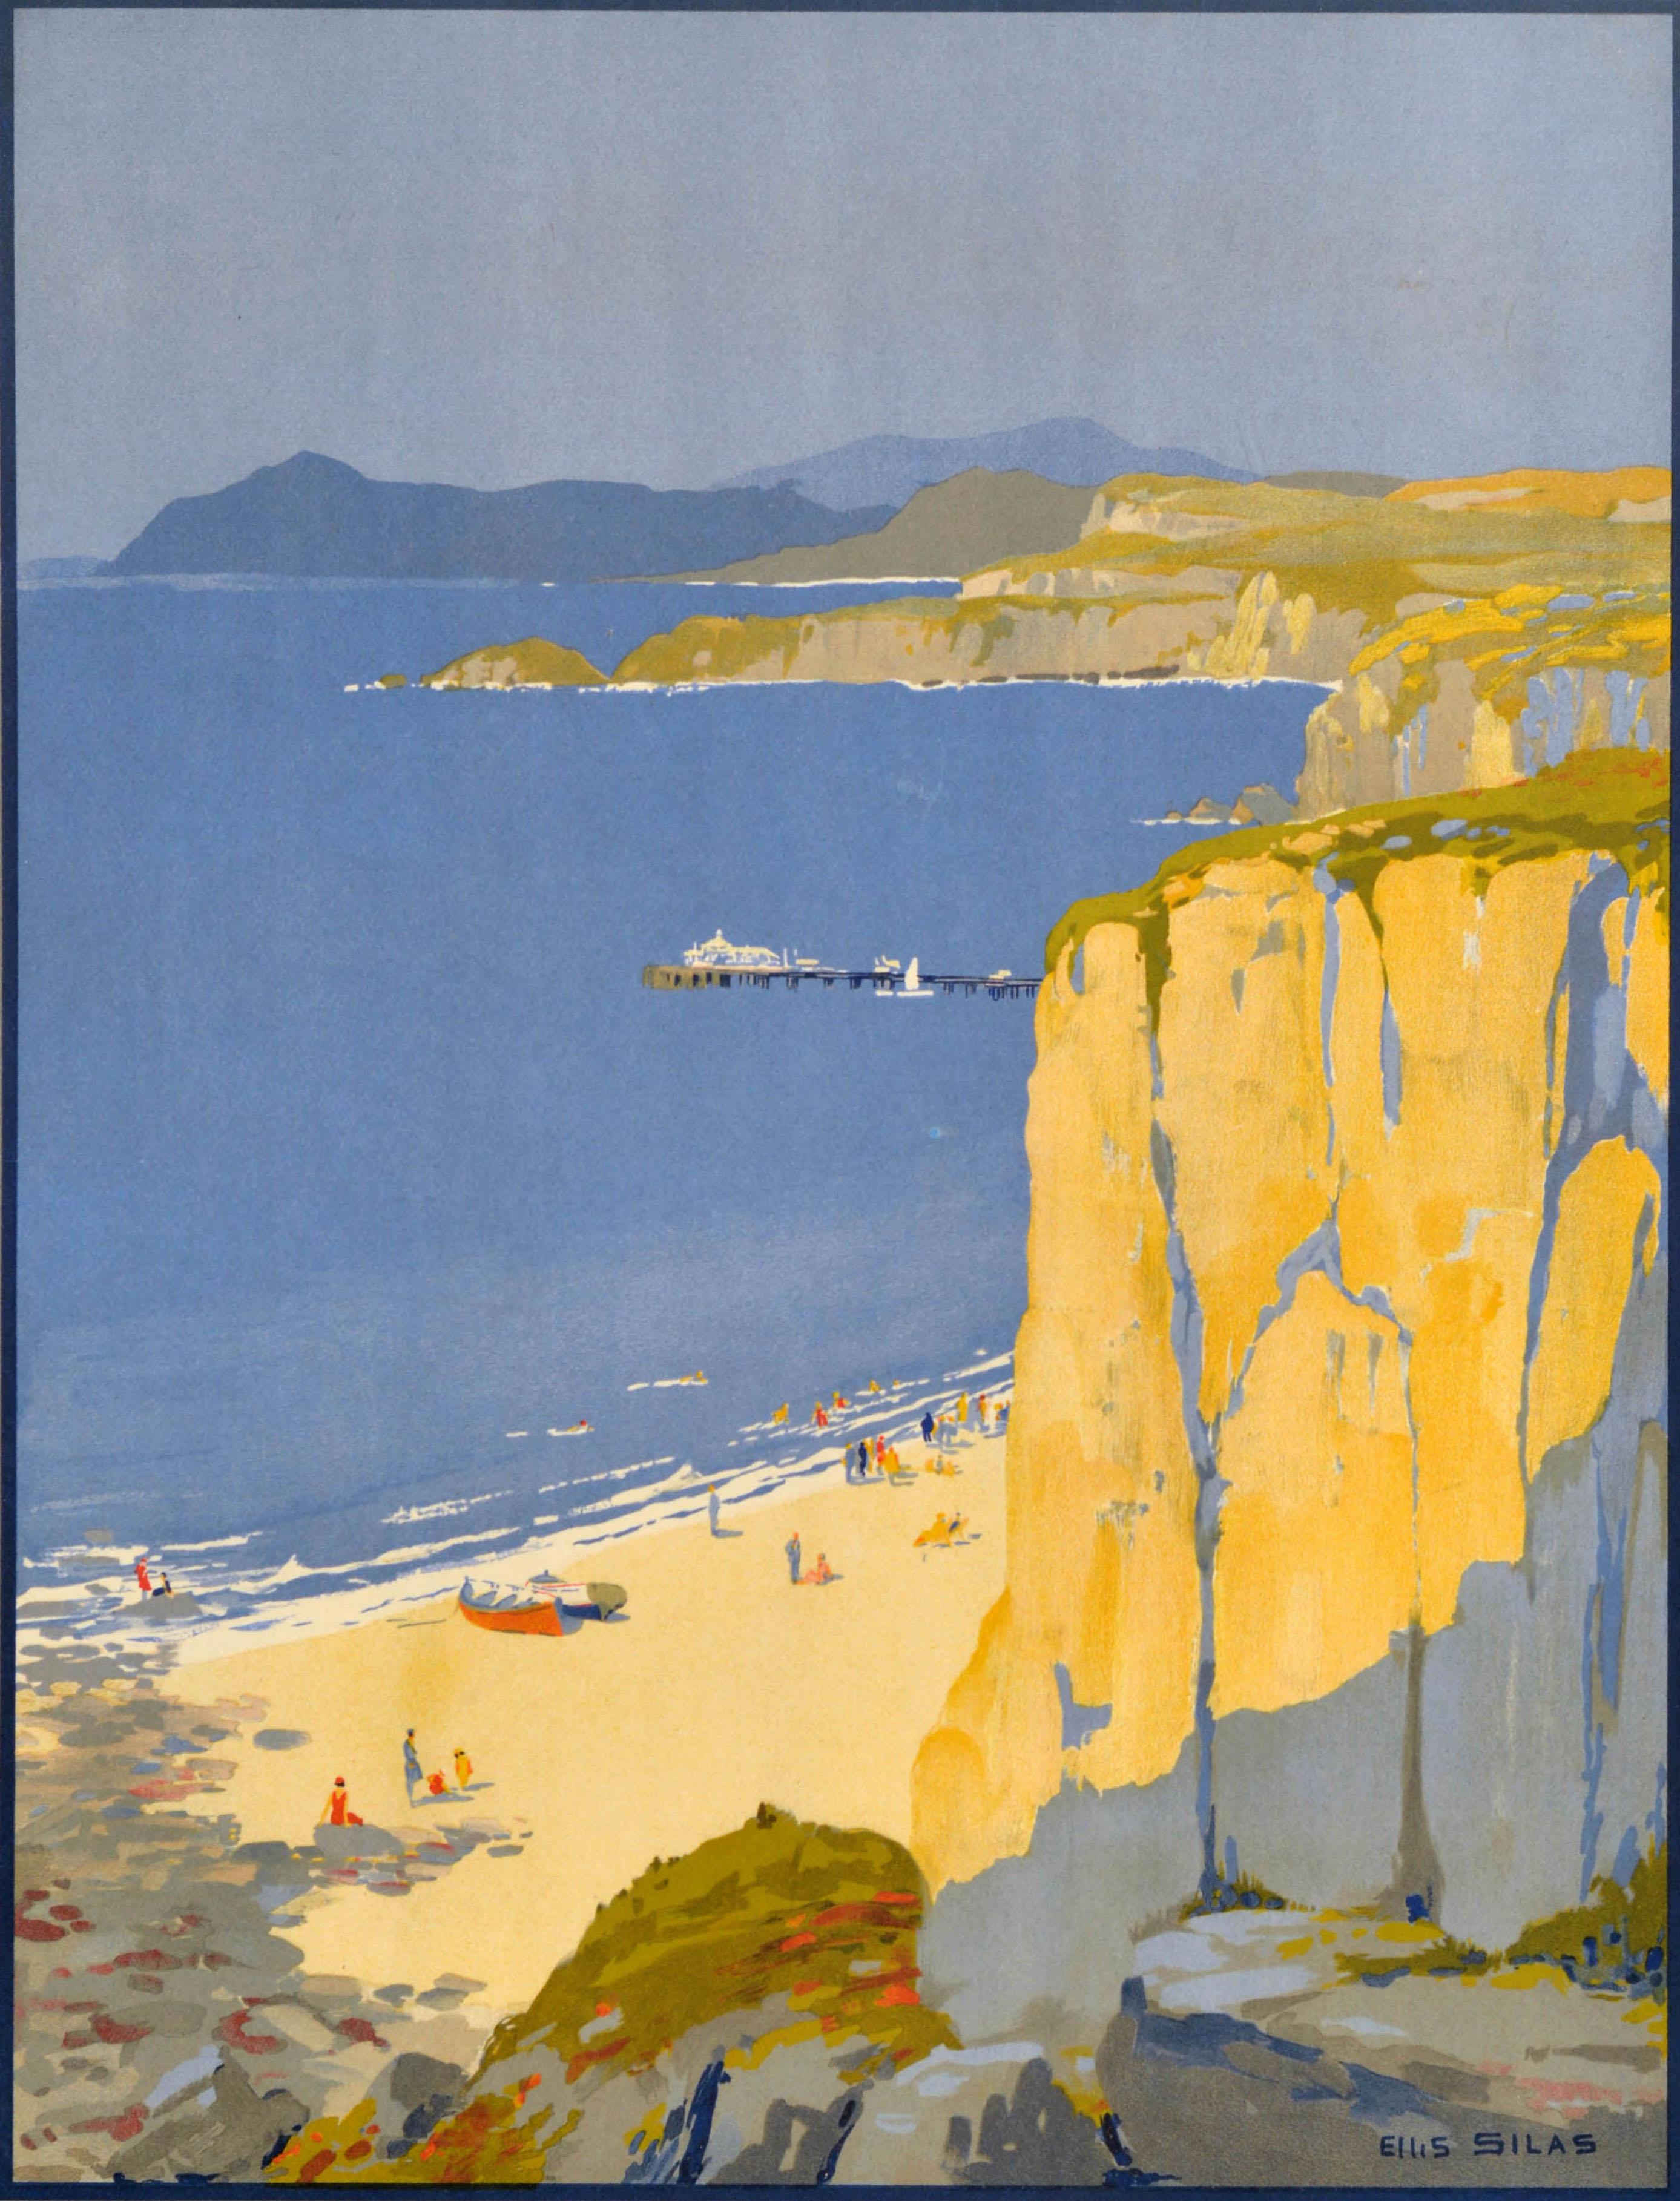 Original Vintage Train Travel Poster North Wales For Holidays LMS Railway Coast - Print by Unknown